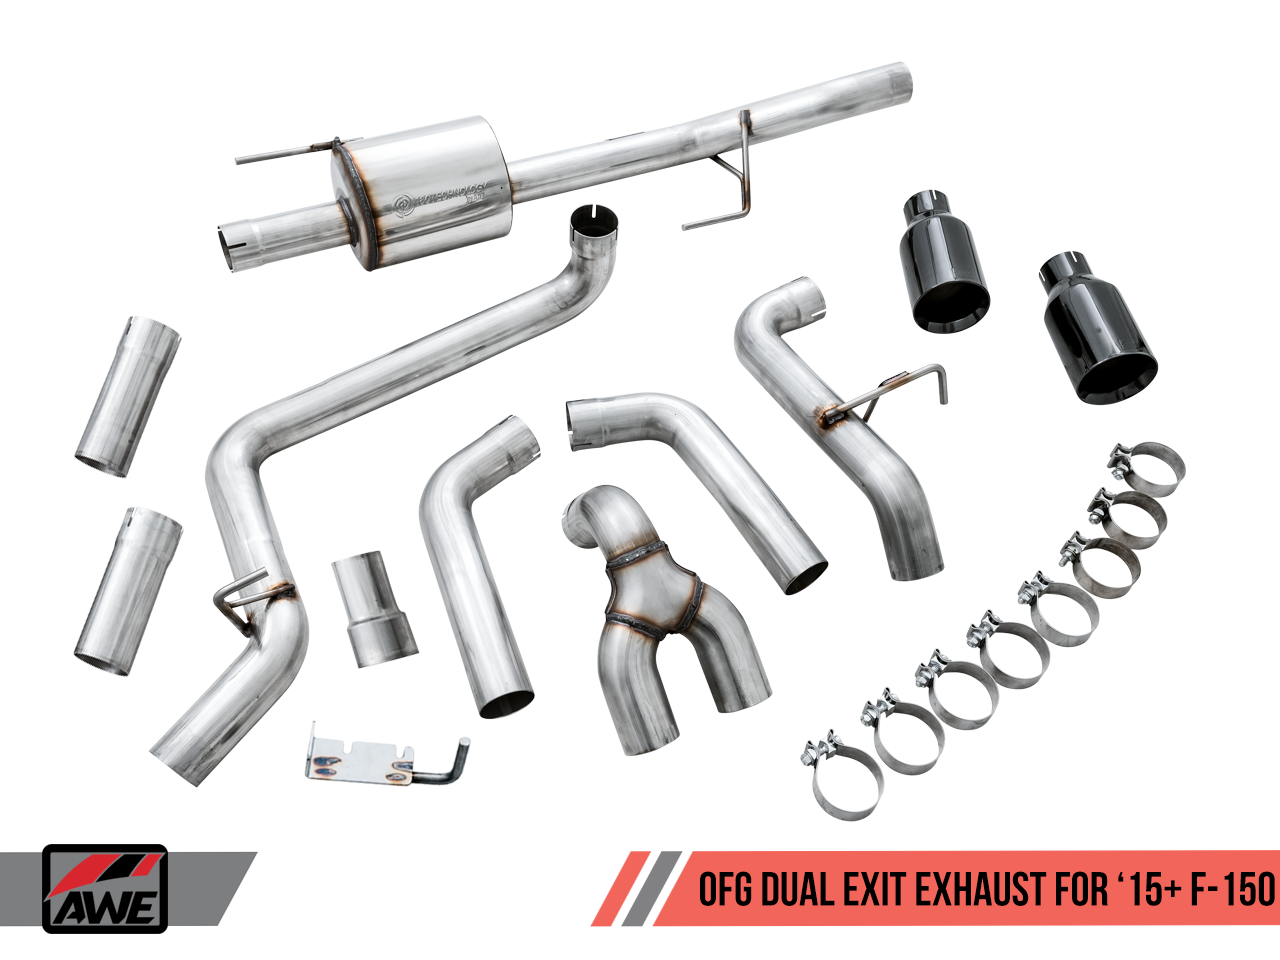 AWE 0FG Exhaust Suite for the '15-'20 Ford F-150 Ecoboost